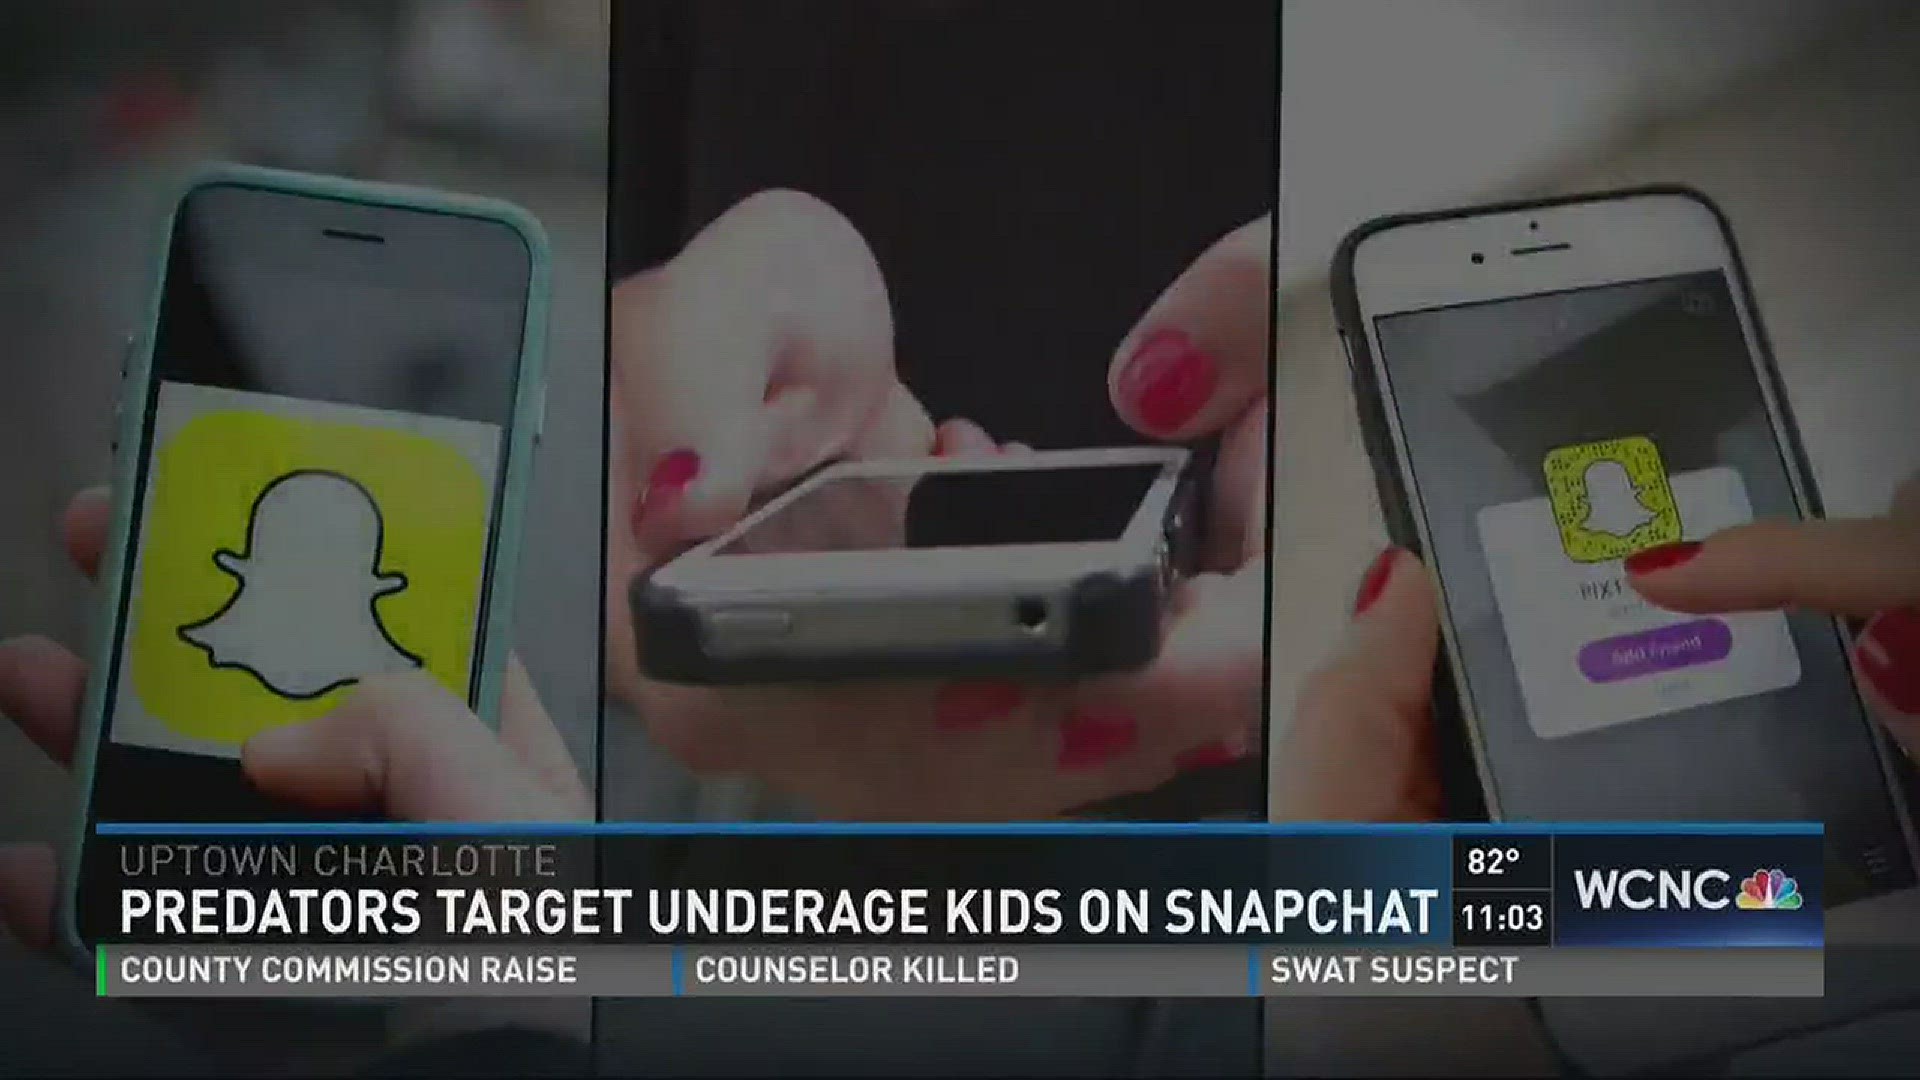 A new warning for parents after a man was arrested for sending naked pictures through Snapchat.